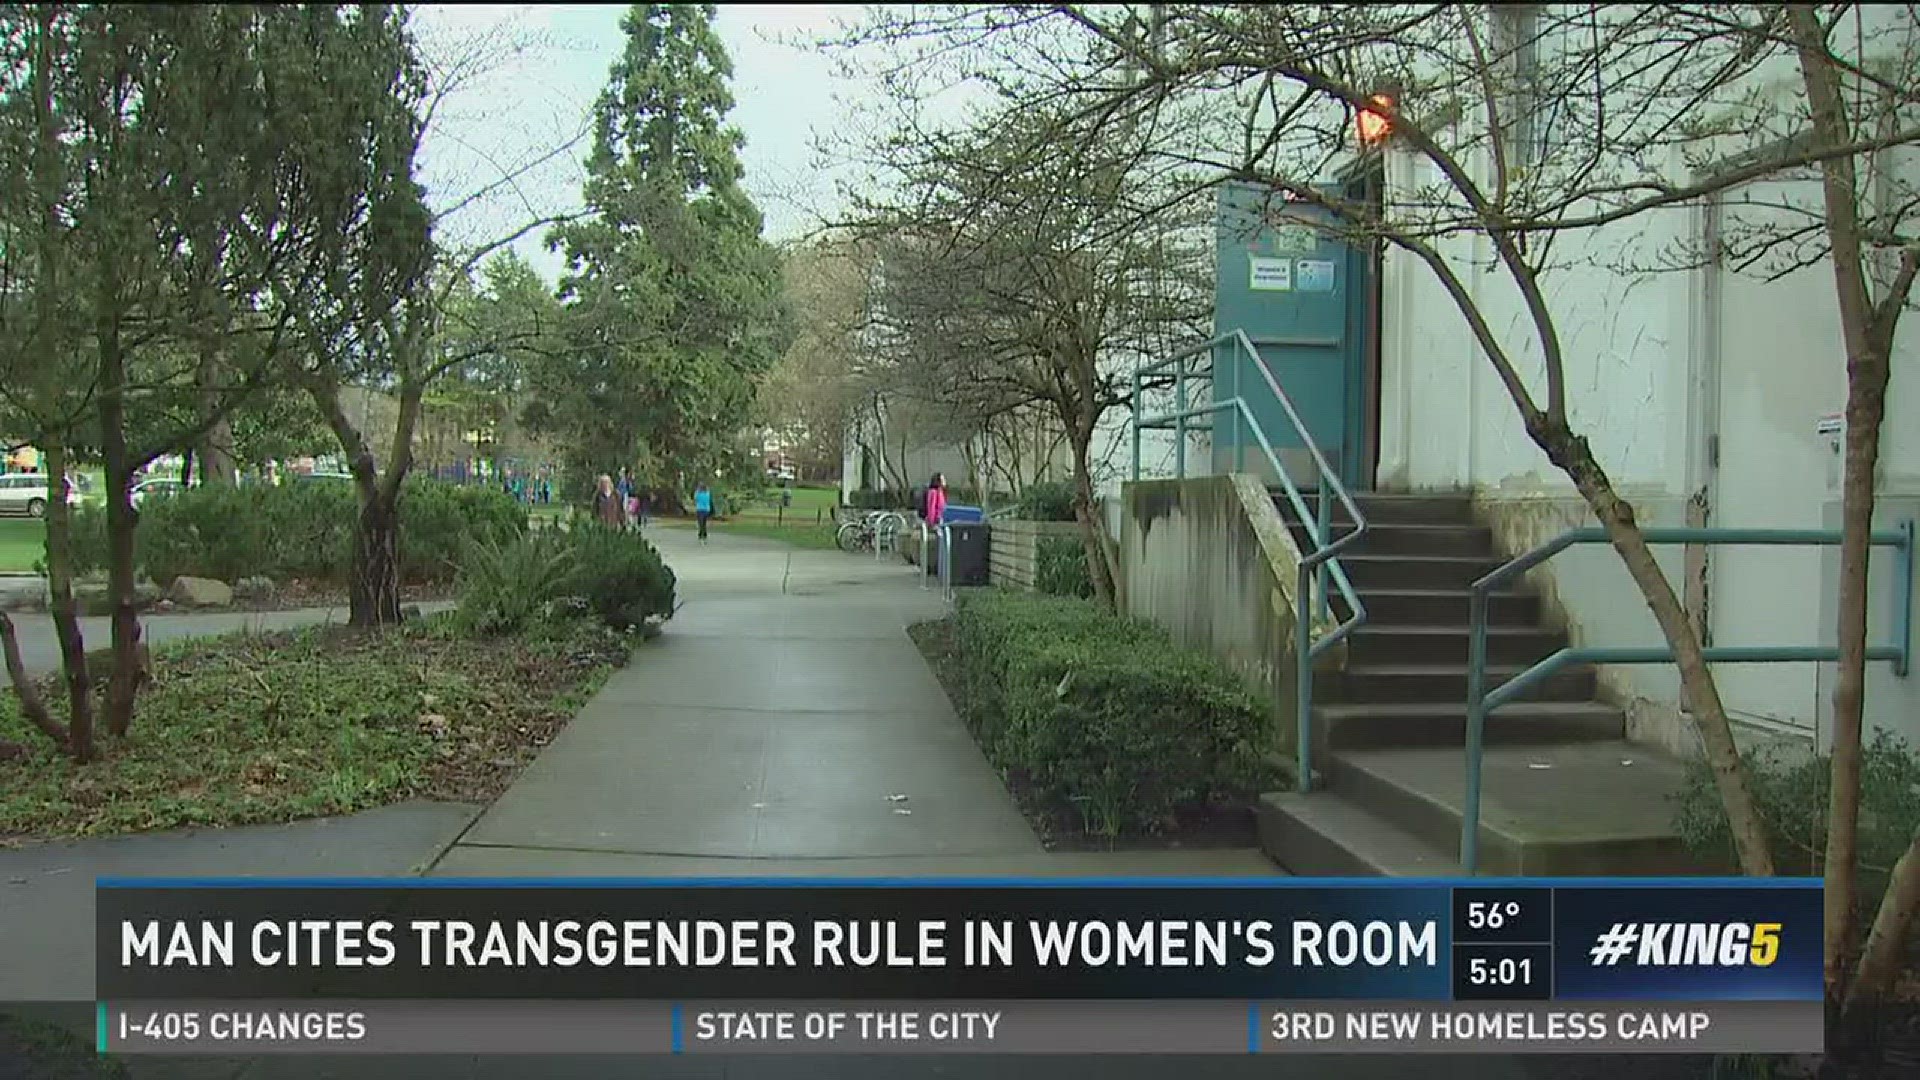 Seattle Parks and Recreation is facing a first-of-a-kind challenge to gender bathroom rules.